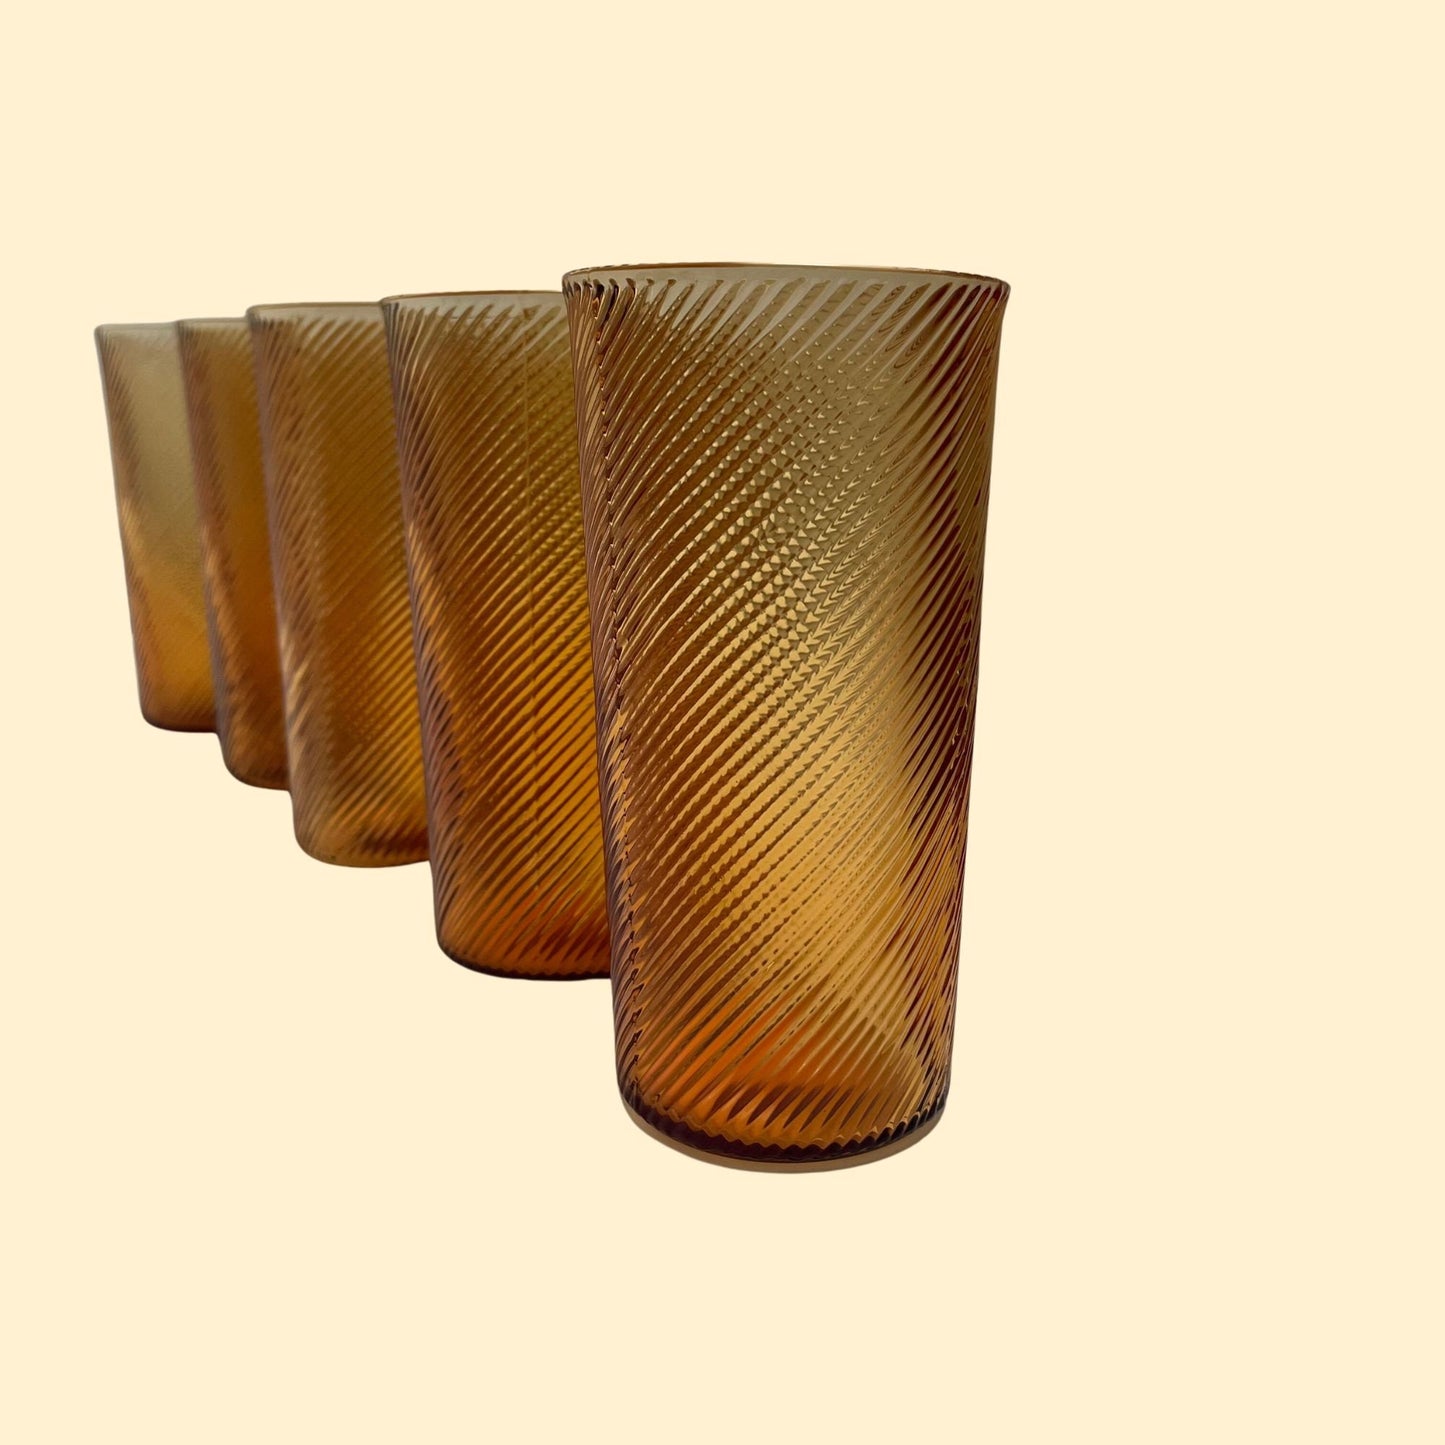 Vintage 1970s amber drinking glasses with swirl pattern, set of 5 orange tumblers, 70s kitchen cups